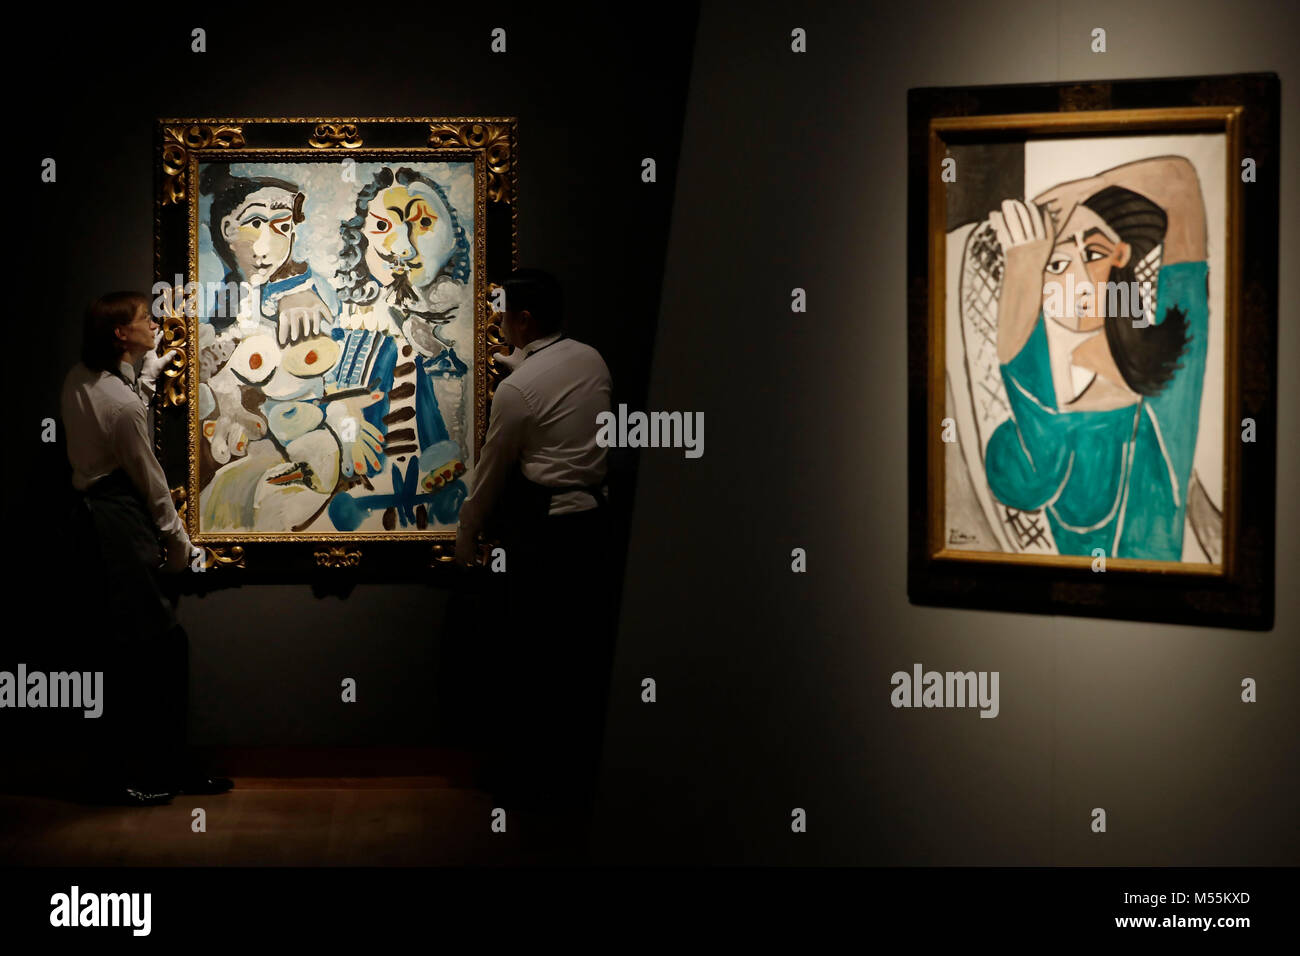 London, UK. 20th February, 2018. Employees pose with paintings (L)  "Mousquetaire at nu assis" and "Femme se coiffant" by artist Pablo Picasso  at Christie's auction house in London Tuesday February 20, 2018.